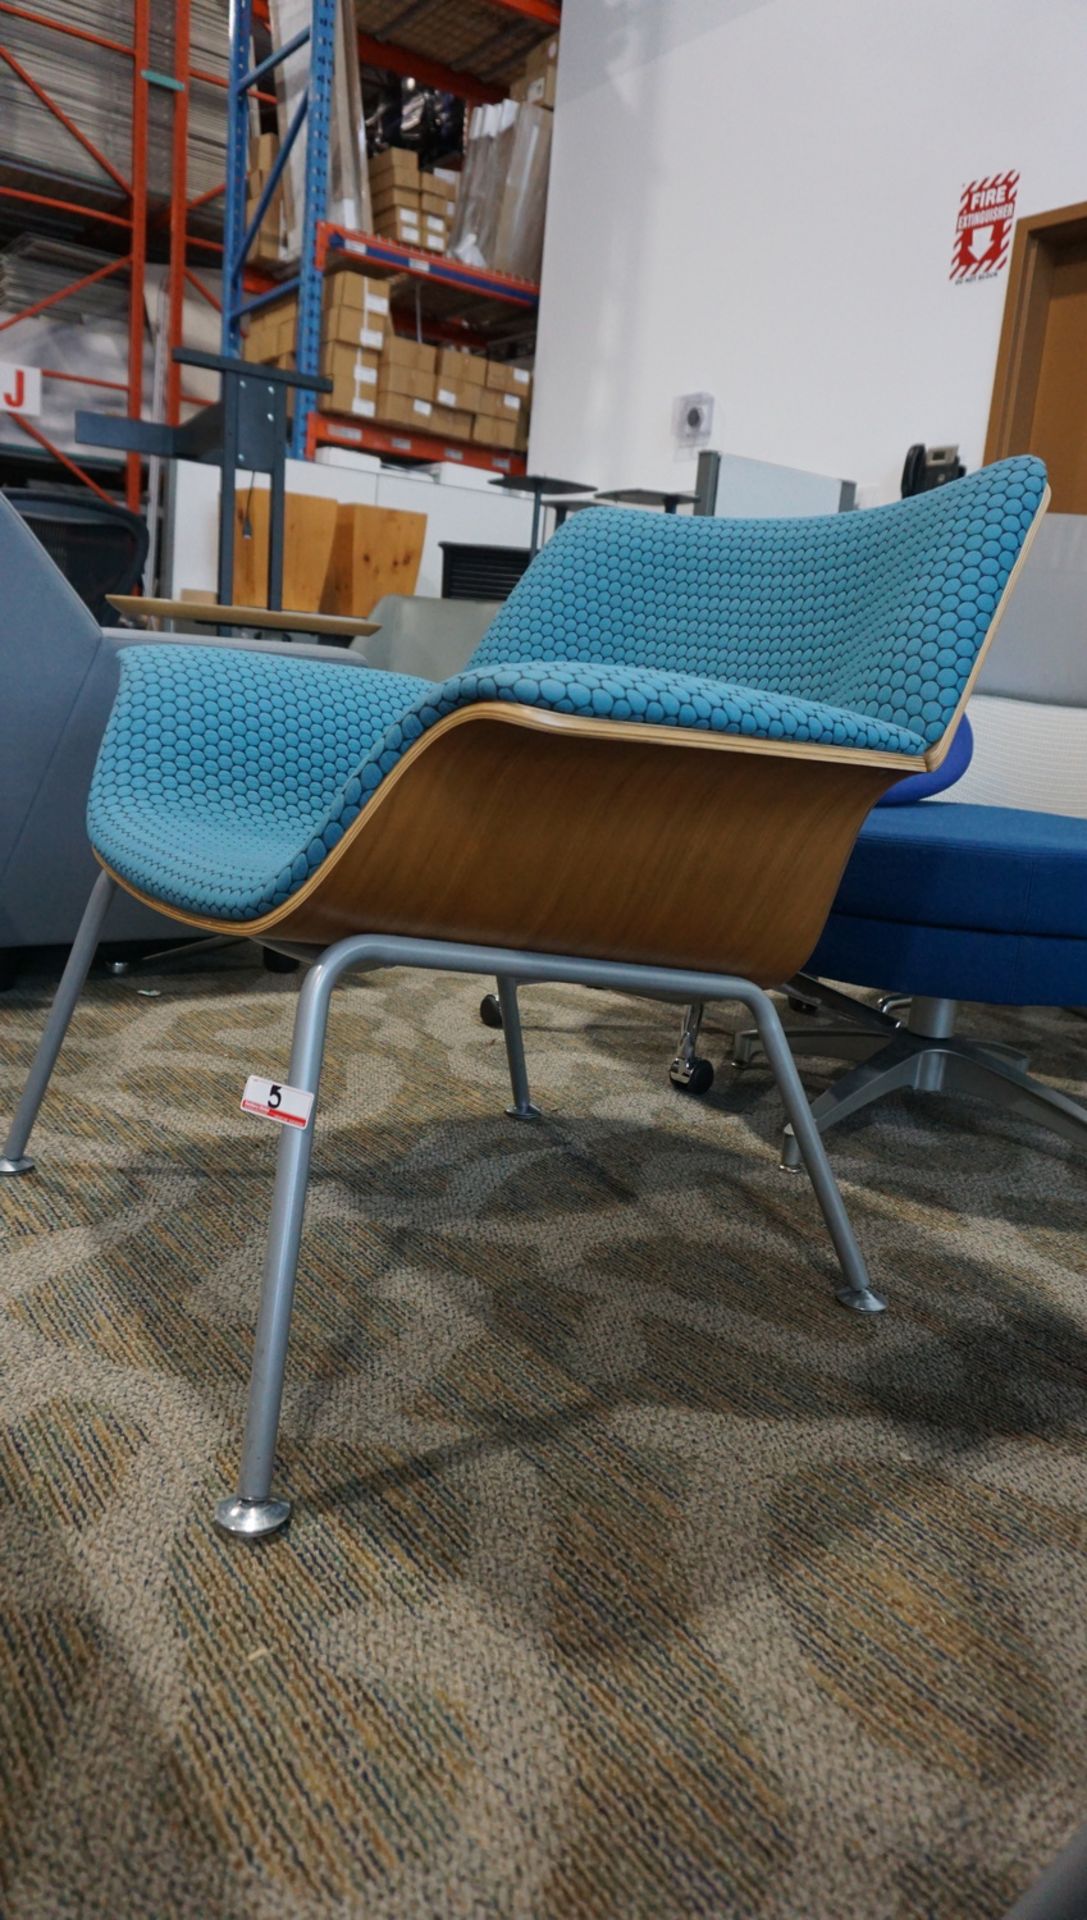 HERMAN MILLER SWOOP PLYWOOD LOUNGE CHAIR W/ LT BLUE FABRIC ($2,500 MSRP) - Image 2 of 3